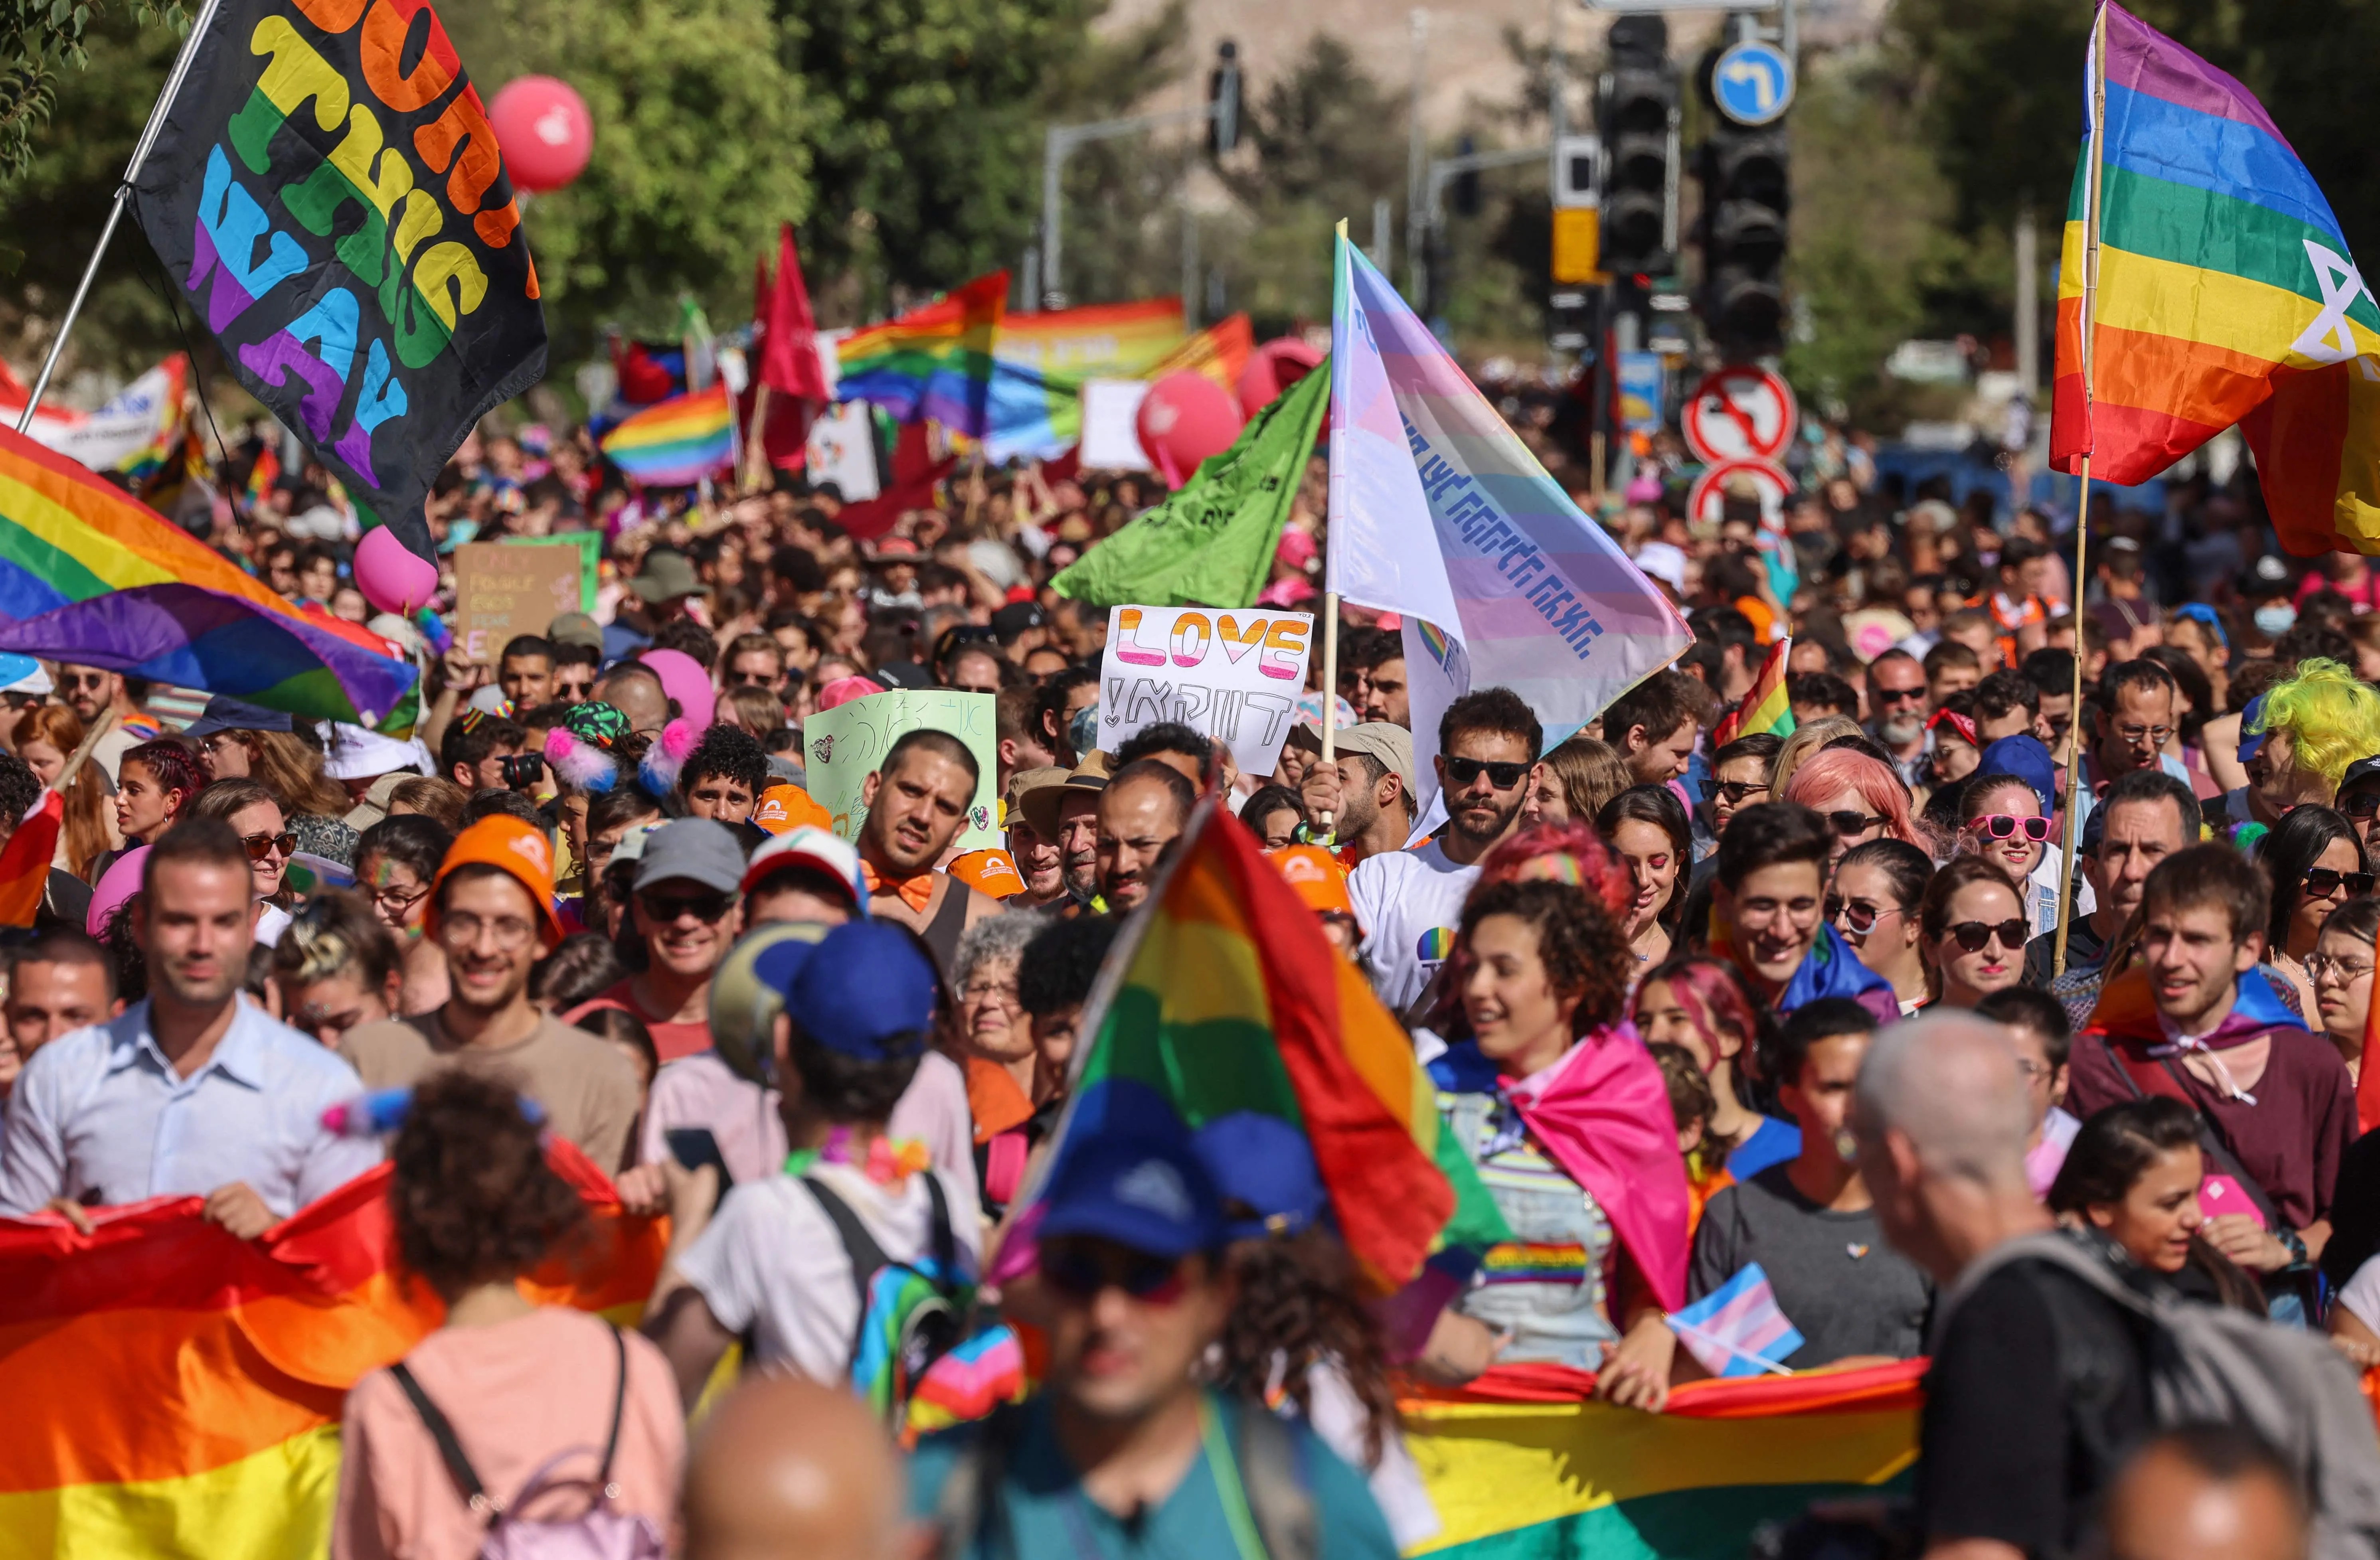 While the traditional rainbow flag represents the LGBTQ community, there are also flags for lesbian, bisexual and trans pride.